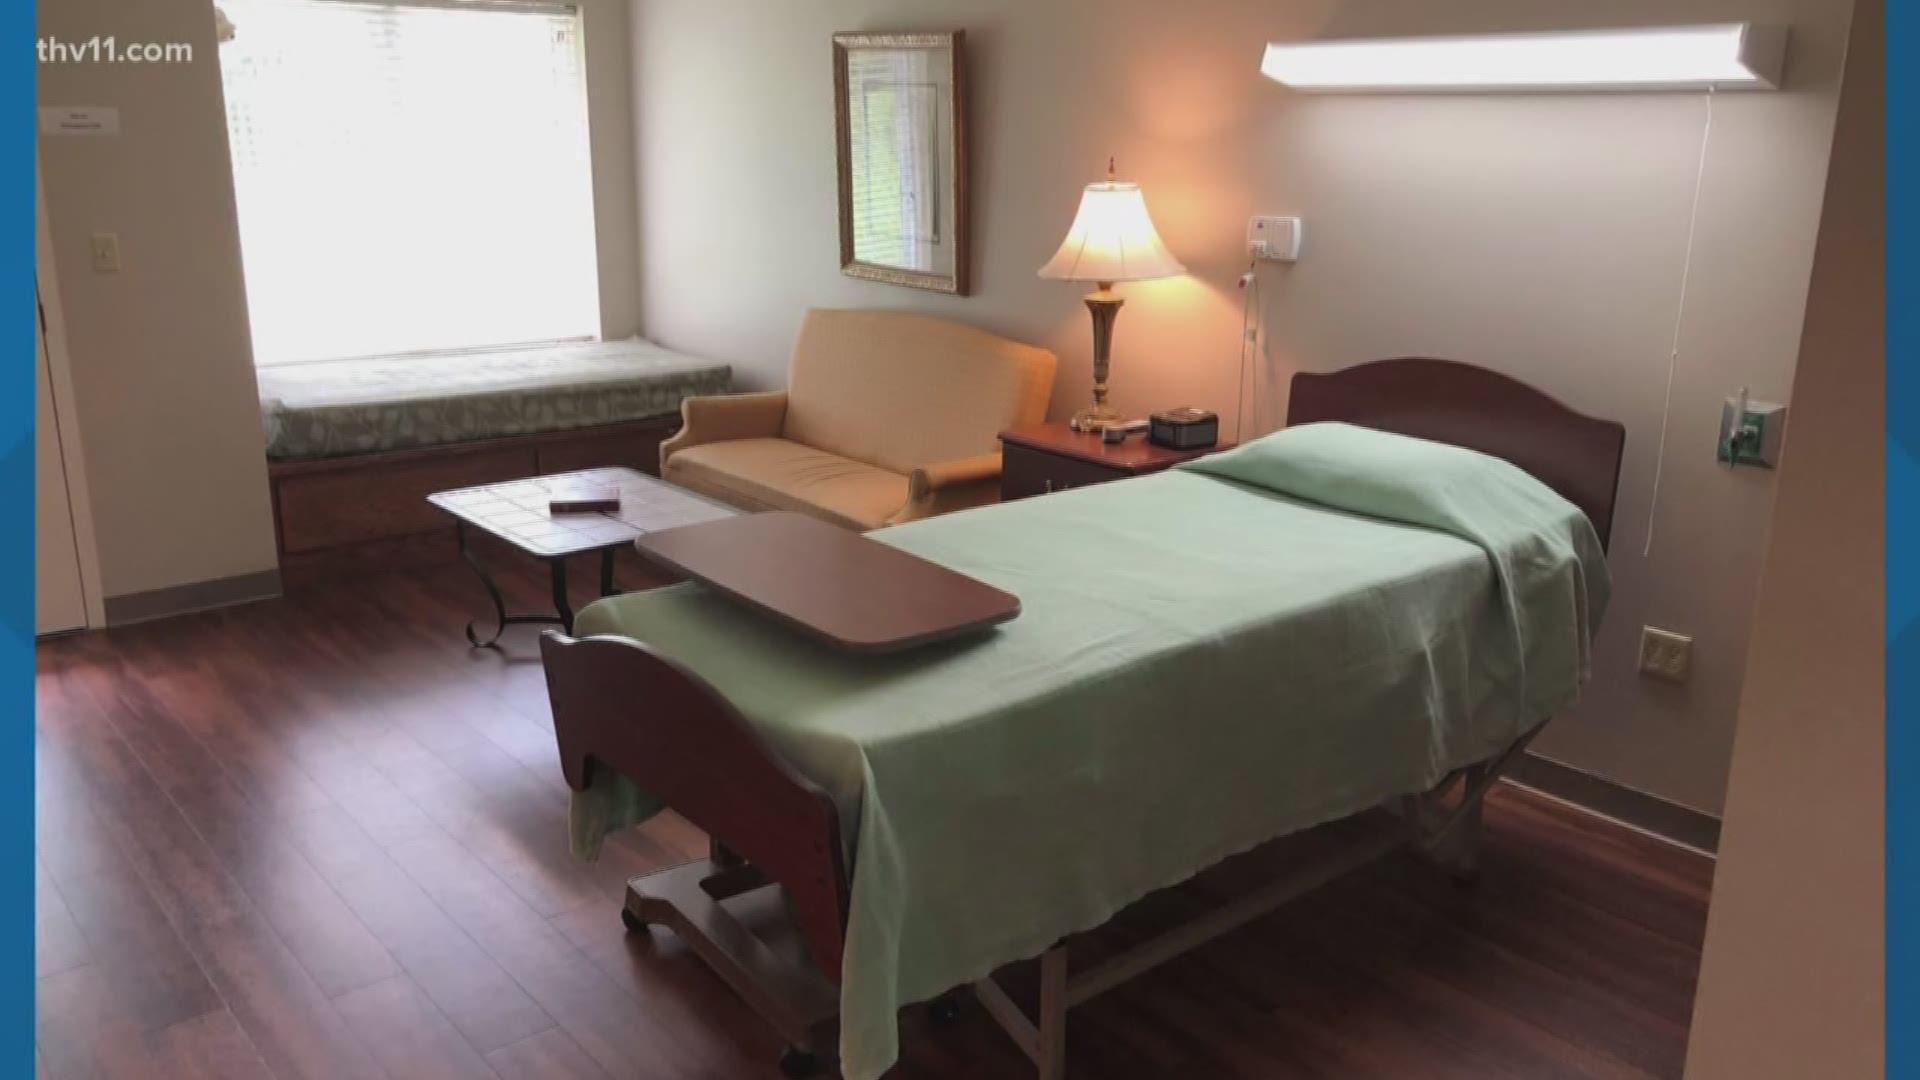 The staff members at the Comfort Care center in Little Rock helped launch a hospice room that will serve people for free.